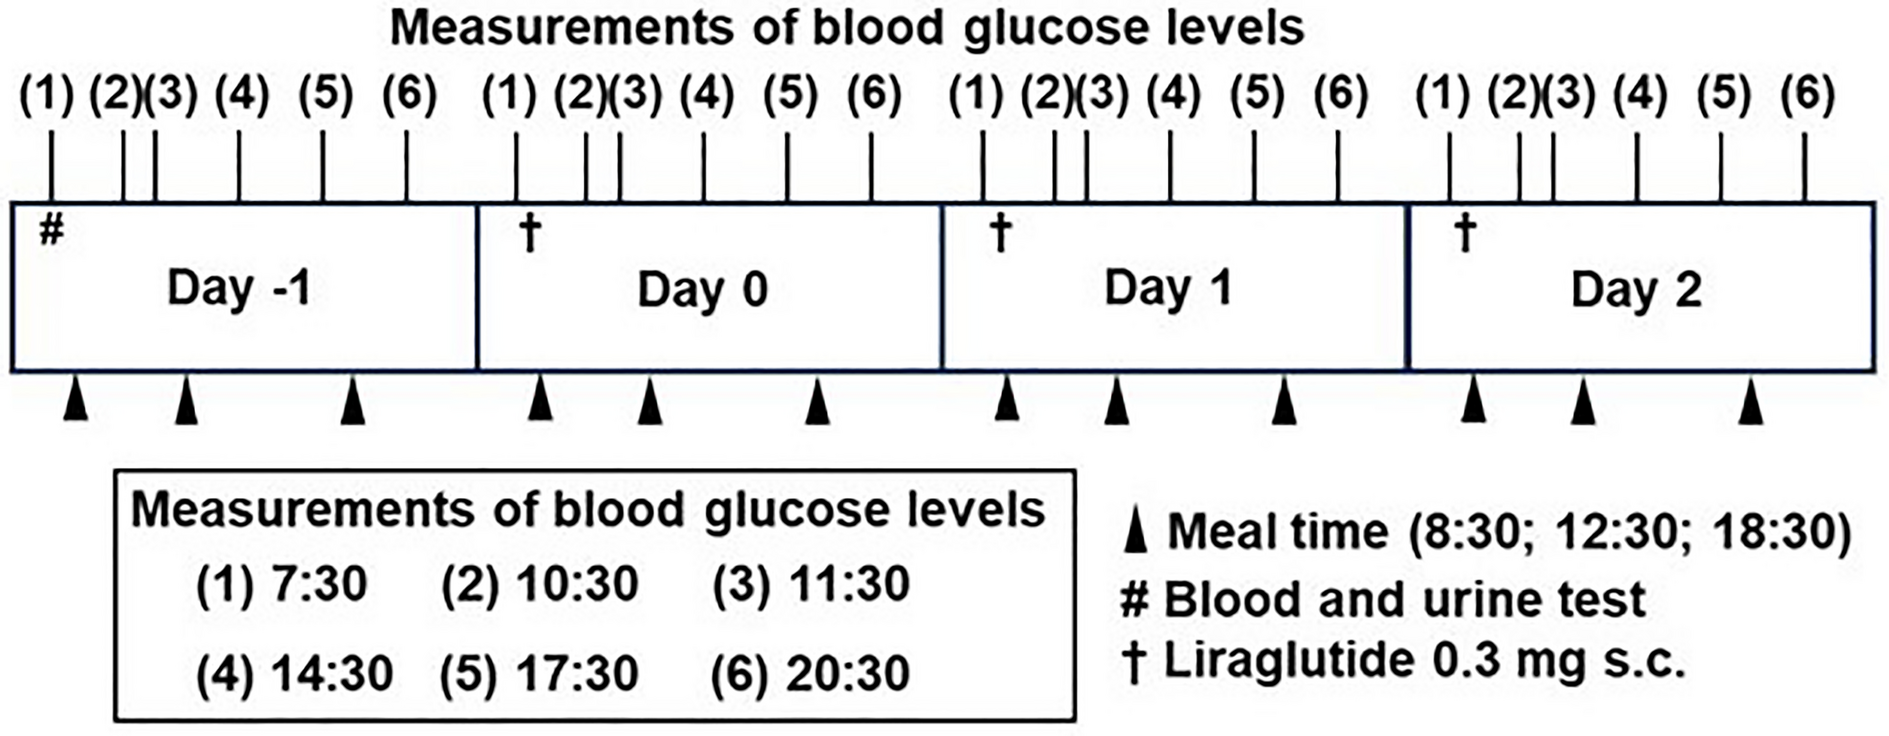 Immediate Impact of Switching from Dipeptidyl Peptidase 4 (DPP4) Inhibitors to Low-Dose (0.3 mg) Liraglutide on Glucose Profiles: A Retrospective Observational Study